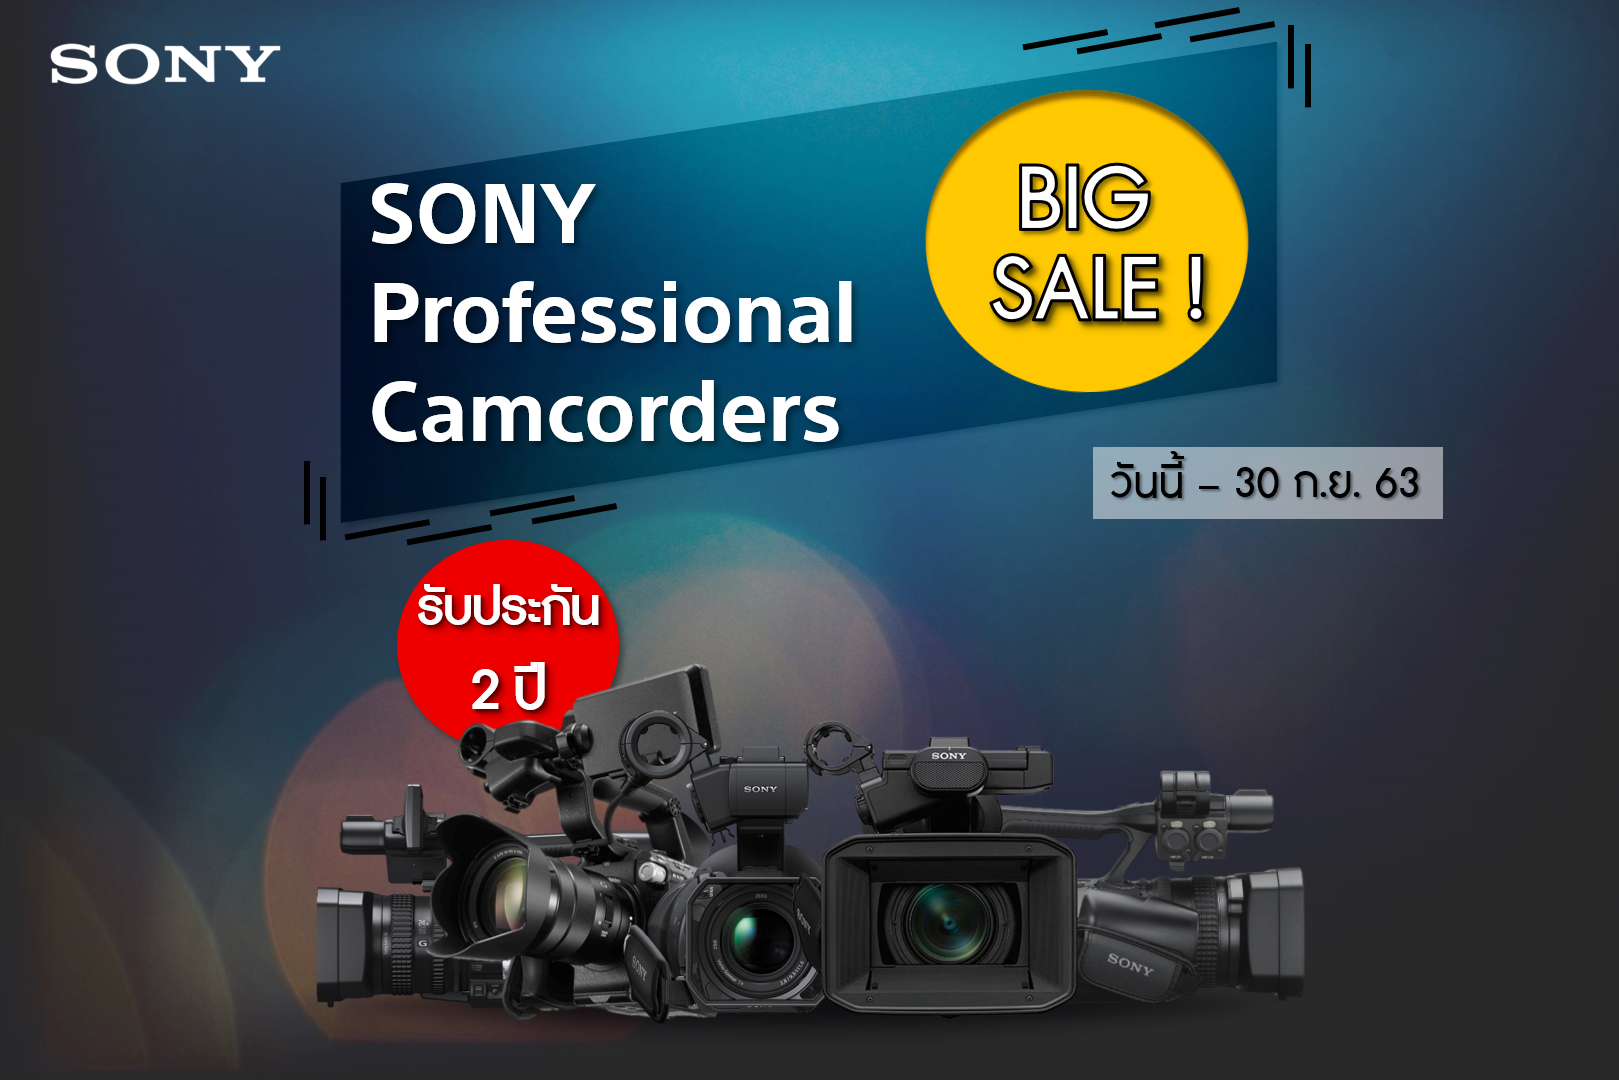 SONY Professional Camcorders Big Sale ! 